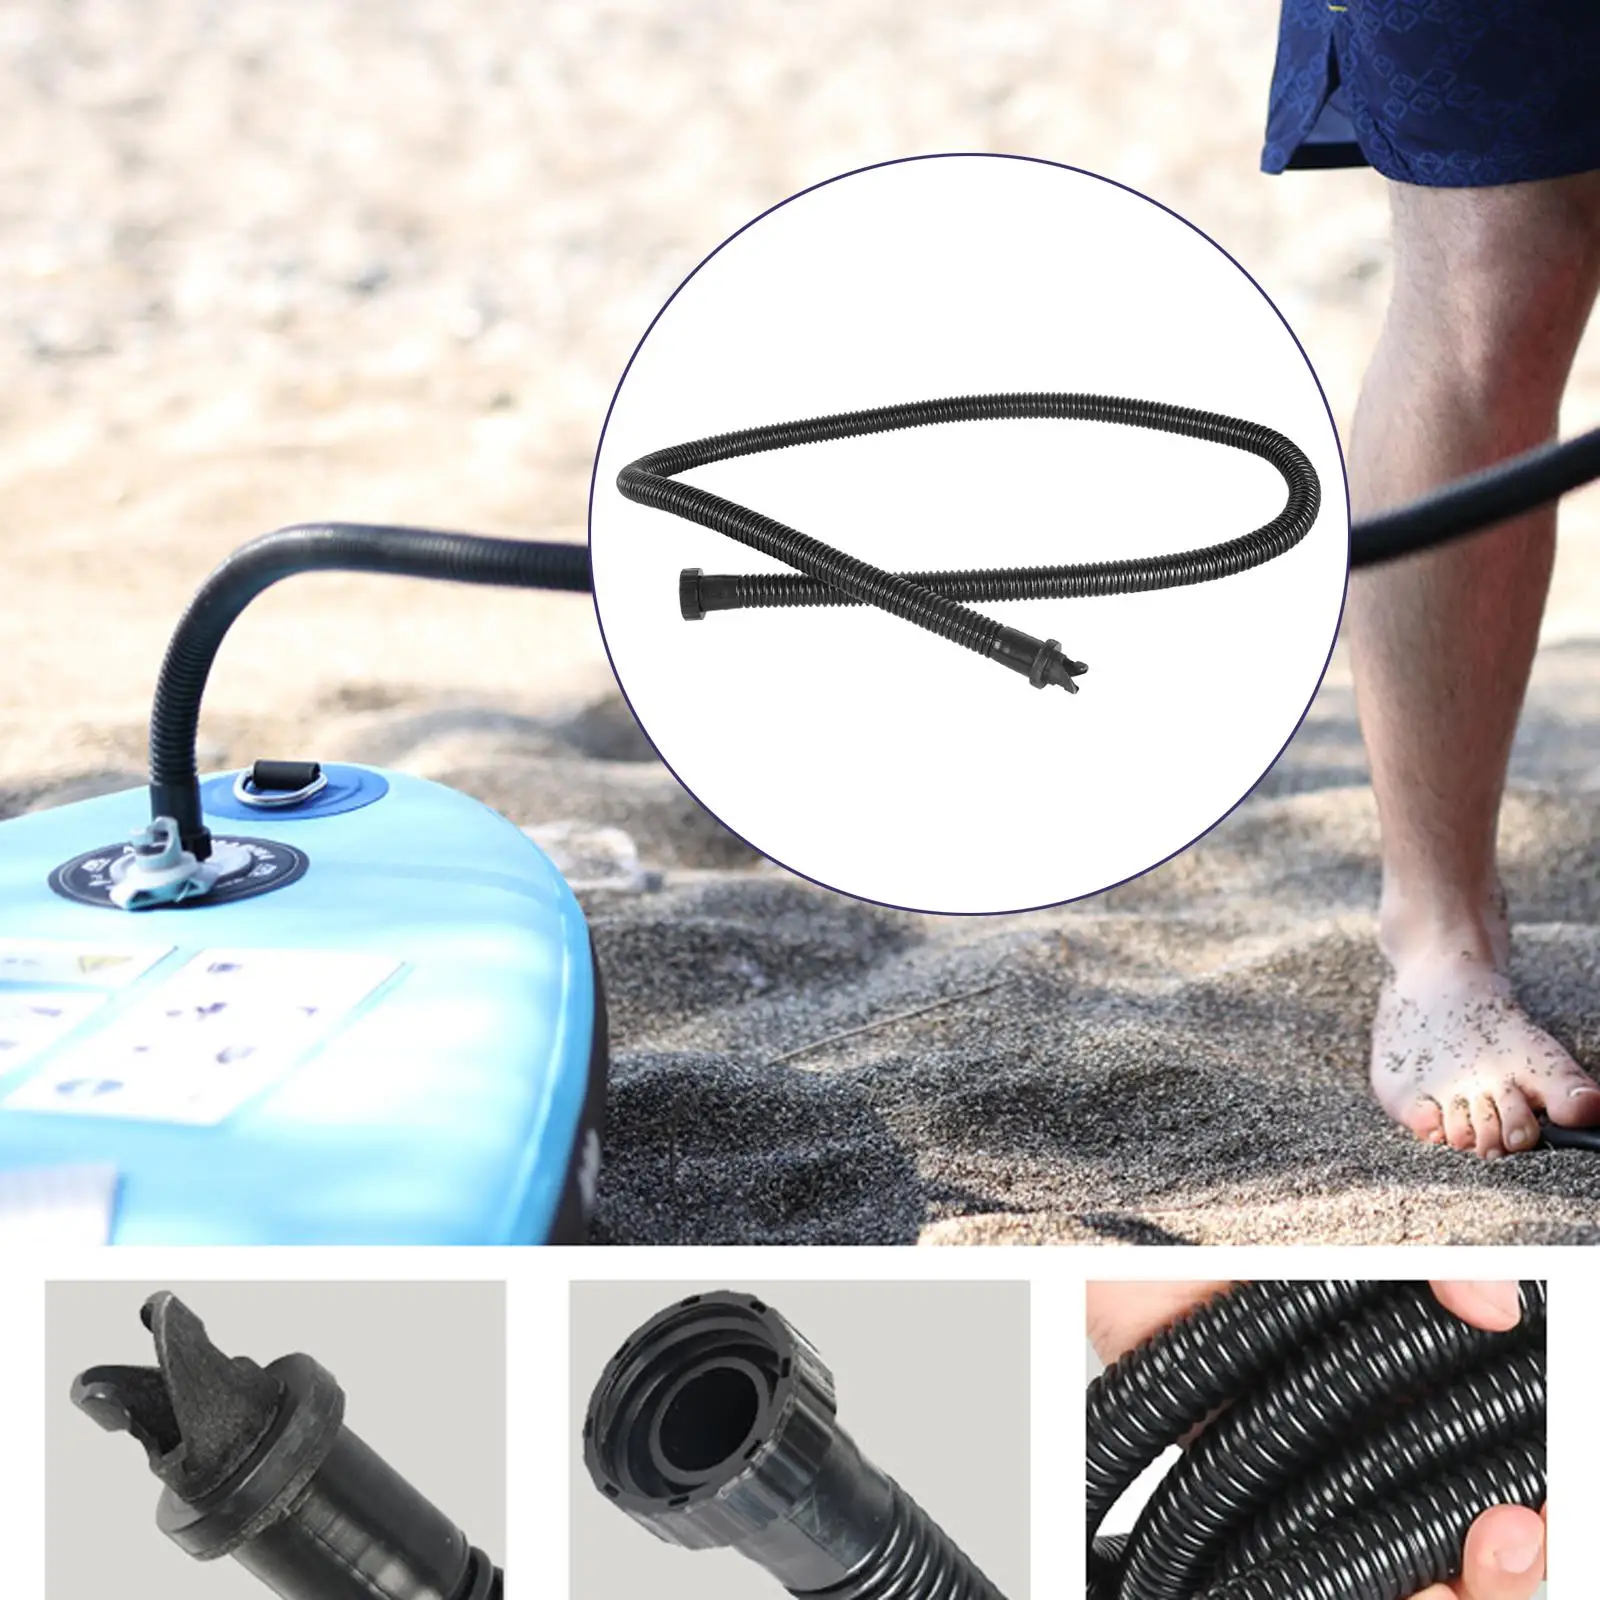 Air Pump Tube Pump Accessories Paddle Board Replacement Pump Valve Hose Spare Repair Parts Inflation Pump Hose for SUP Surfboard